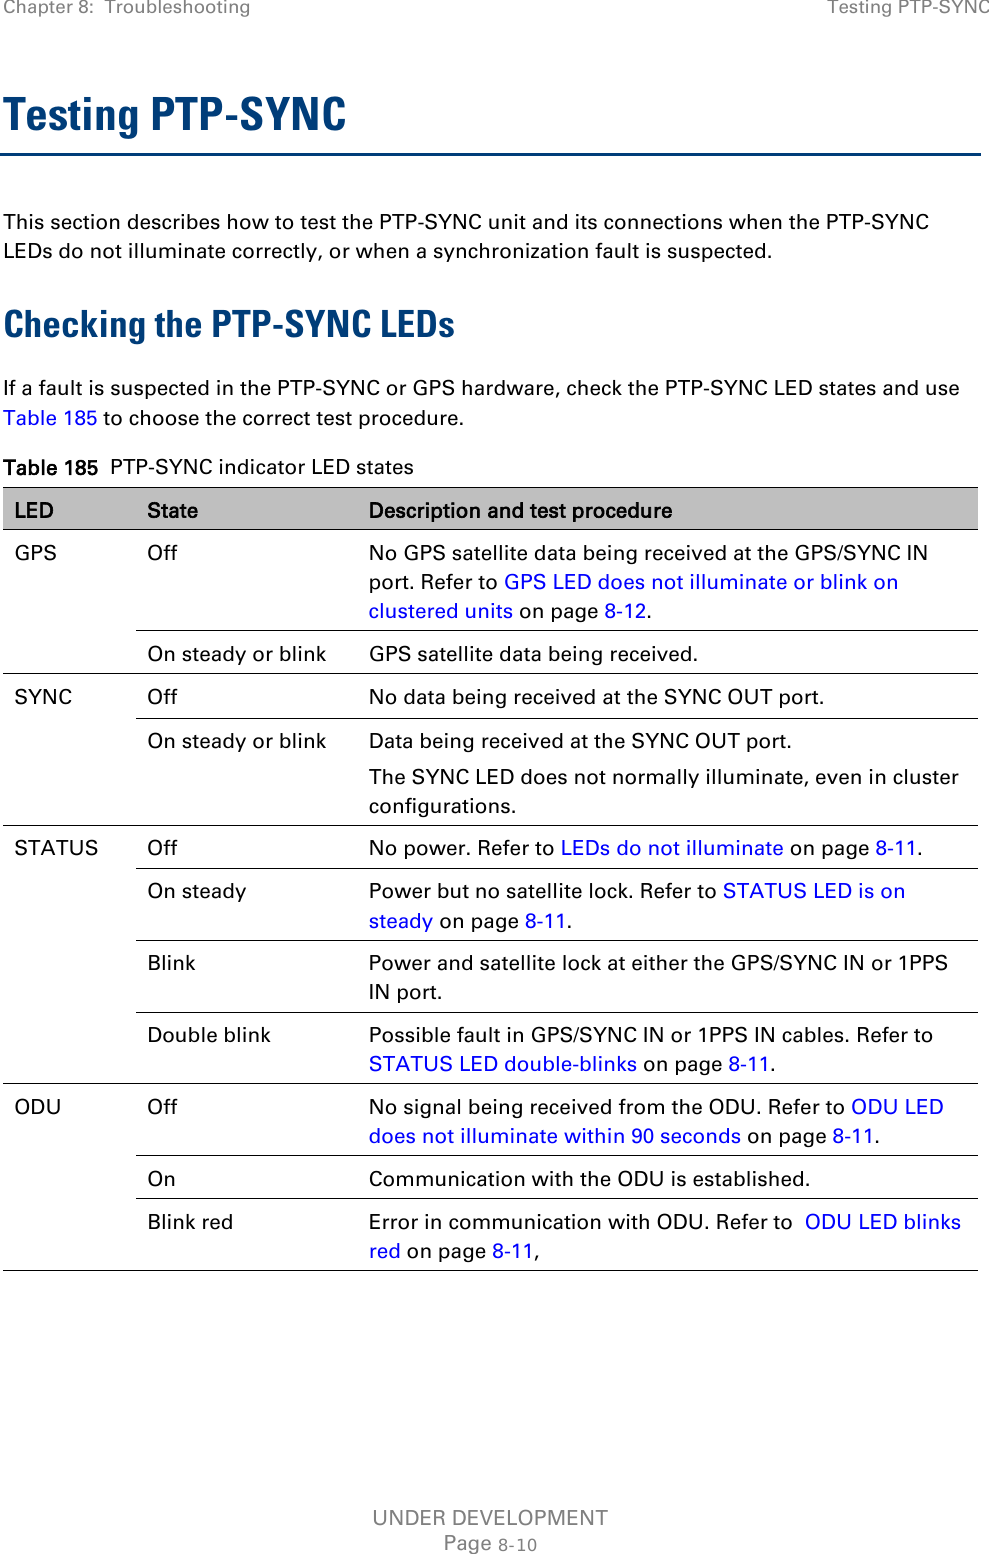 Chapter 8:  Troubleshooting Testing PTP-SYNC  Testing PTP-SYNC This section describes how to test the PTP-SYNC unit and its connections when the PTP-SYNC LEDs do not illuminate correctly, or when a synchronization fault is suspected. Checking the PTP-SYNC LEDs If a fault is suspected in the PTP-SYNC or GPS hardware, check the PTP-SYNC LED states and use Table 185 to choose the correct test procedure. Table 185  PTP-SYNC indicator LED states LED State Description and test procedure GPS Off No GPS satellite data being received at the GPS/SYNC IN port. Refer to GPS LED does not illuminate or blink on clustered units on page 8-12. On steady or blink GPS satellite data being received. SYNC Off No data being received at the SYNC OUT port. On steady or blink Data being received at the SYNC OUT port. The SYNC LED does not normally illuminate, even in cluster configurations. STATUS Off No power. Refer to LEDs do not illuminate on page 8-11. On steady Power but no satellite lock. Refer to STATUS LED is on steady on page 8-11. Blink Power and satellite lock at either the GPS/SYNC IN or 1PPS IN port. Double blink Possible fault in GPS/SYNC IN or 1PPS IN cables. Refer to STATUS LED double-blinks on page 8-11. ODU Off No signal being received from the ODU. Refer to ODU LED does not illuminate within 90 seconds on page 8-11. On Communication with the ODU is established. Blink red Error in communication with ODU. Refer to  ODU LED blinks red on page 8-11,  UNDER DEVELOPMENT Page 8-10 